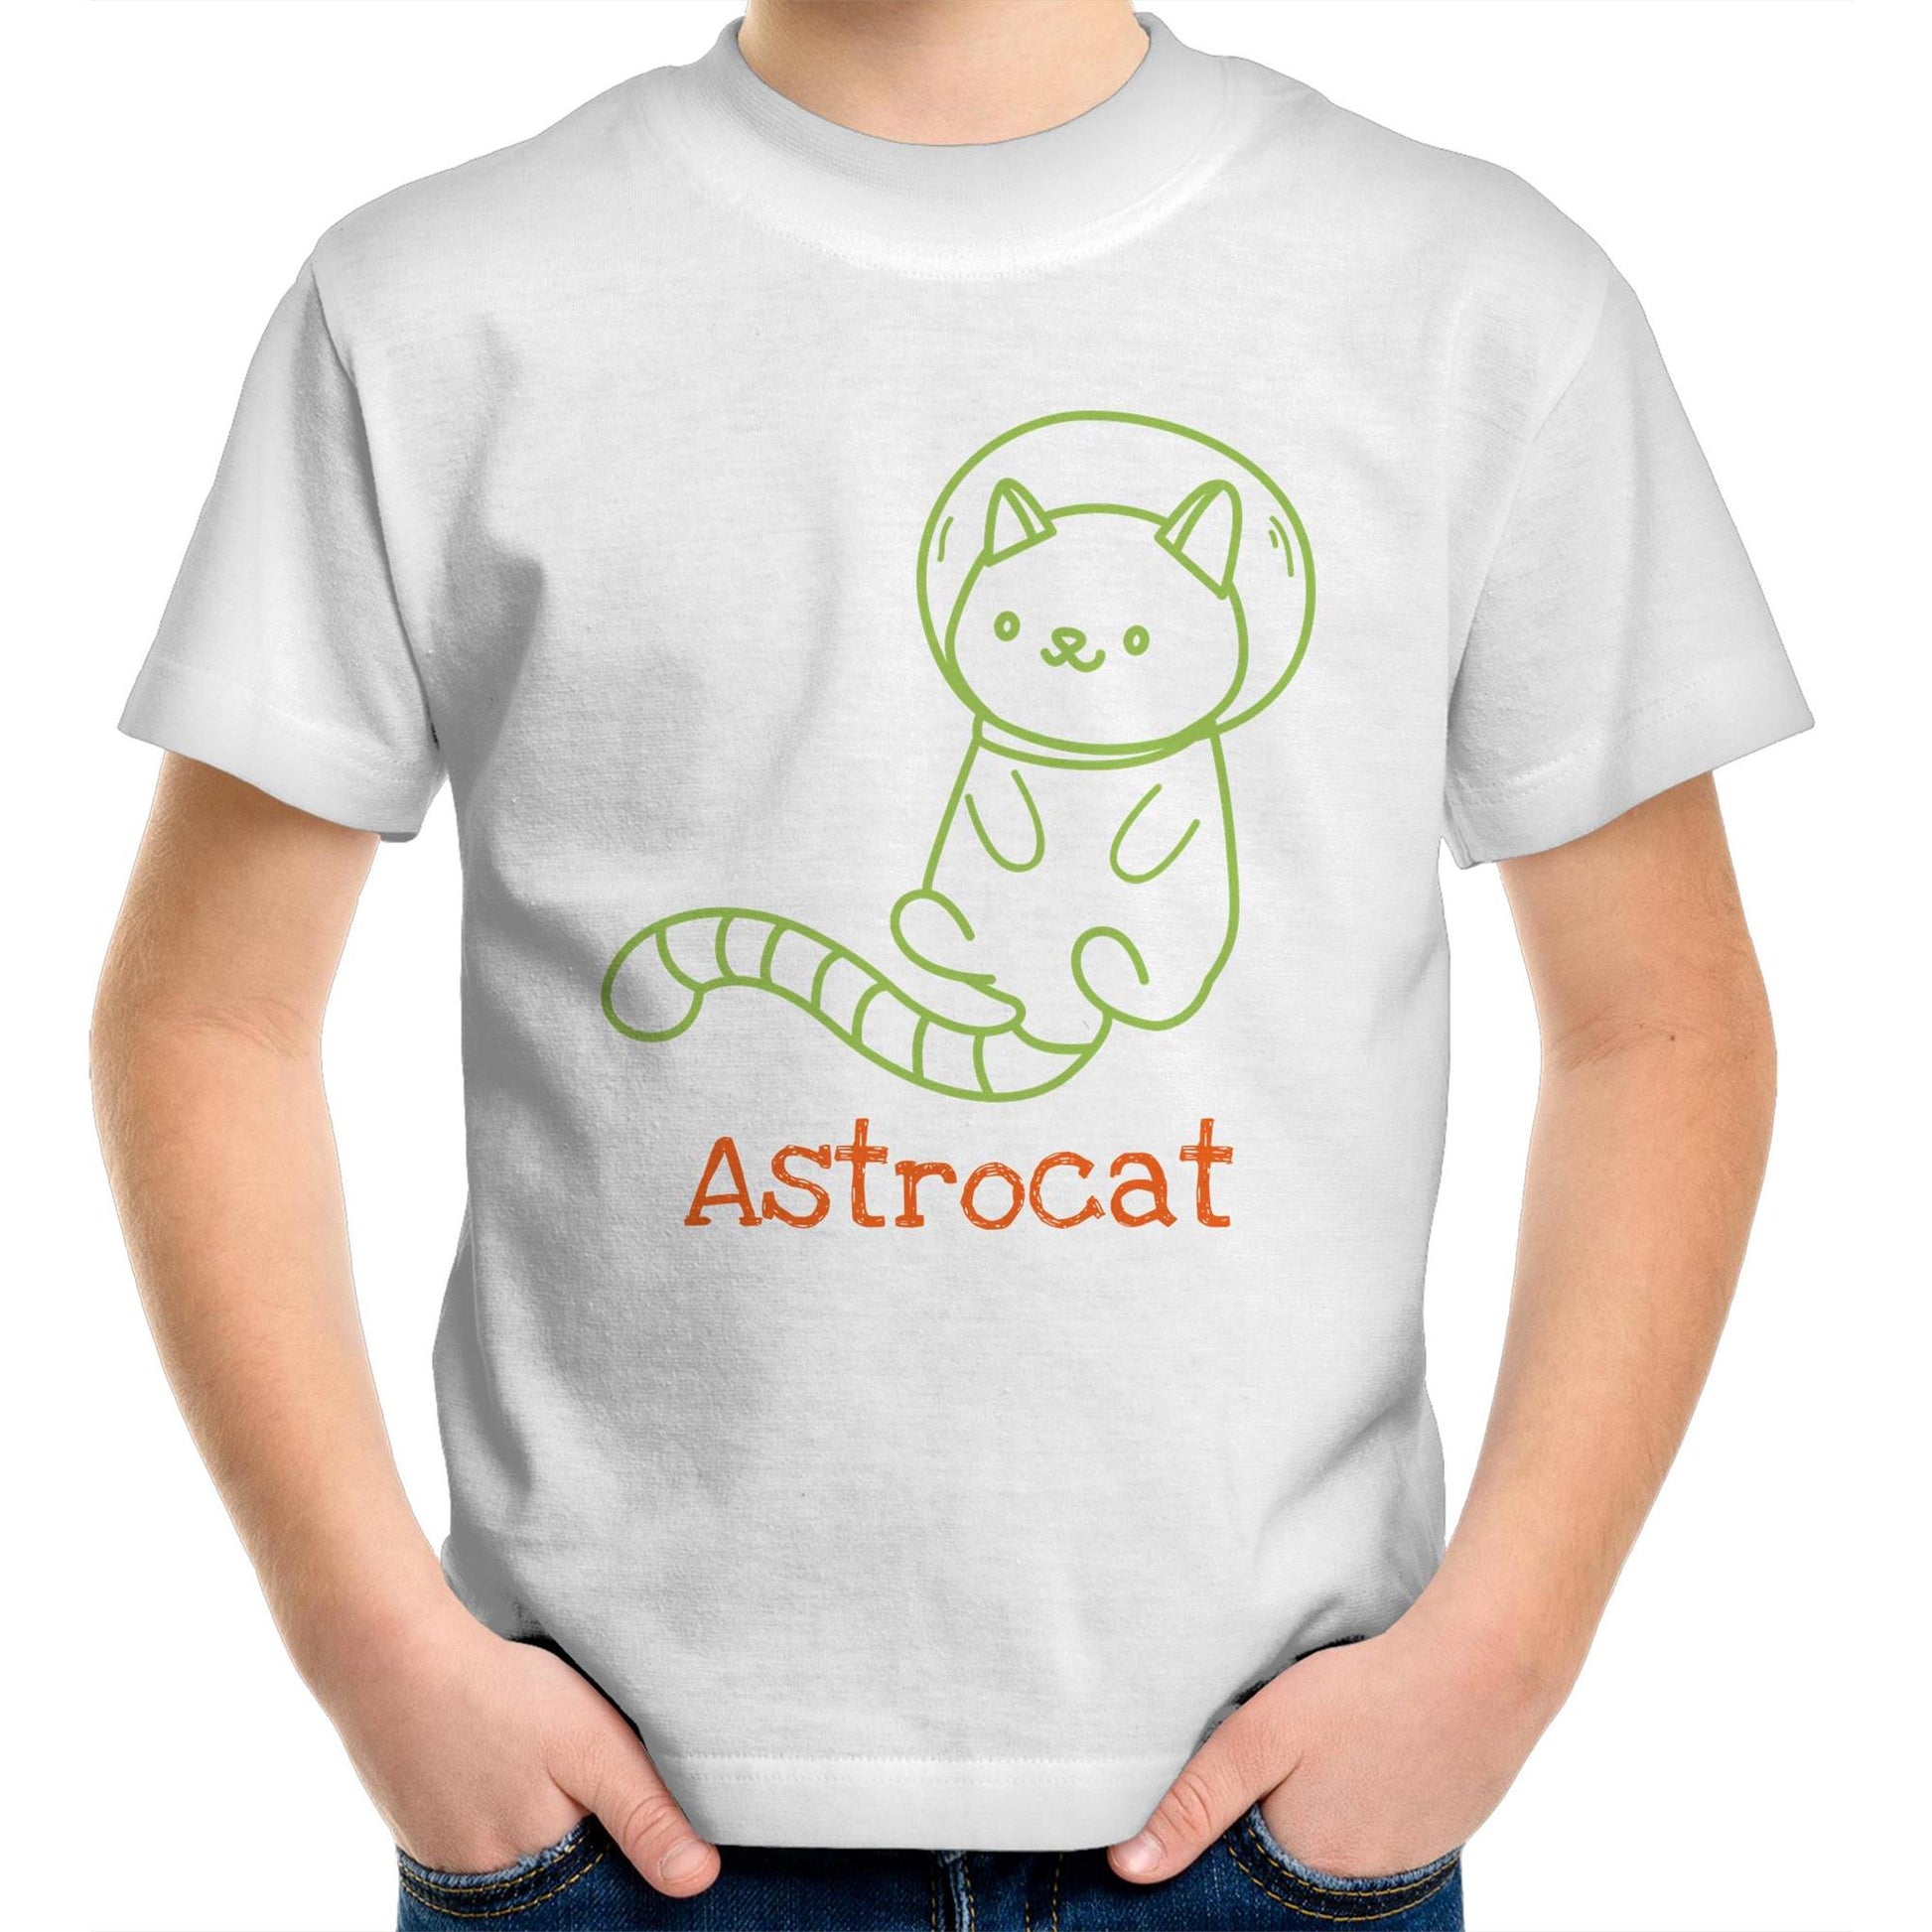 Astrocat - Kids Youth Crew T-Shirt White Kids Youth T-shirt animal Funny Space